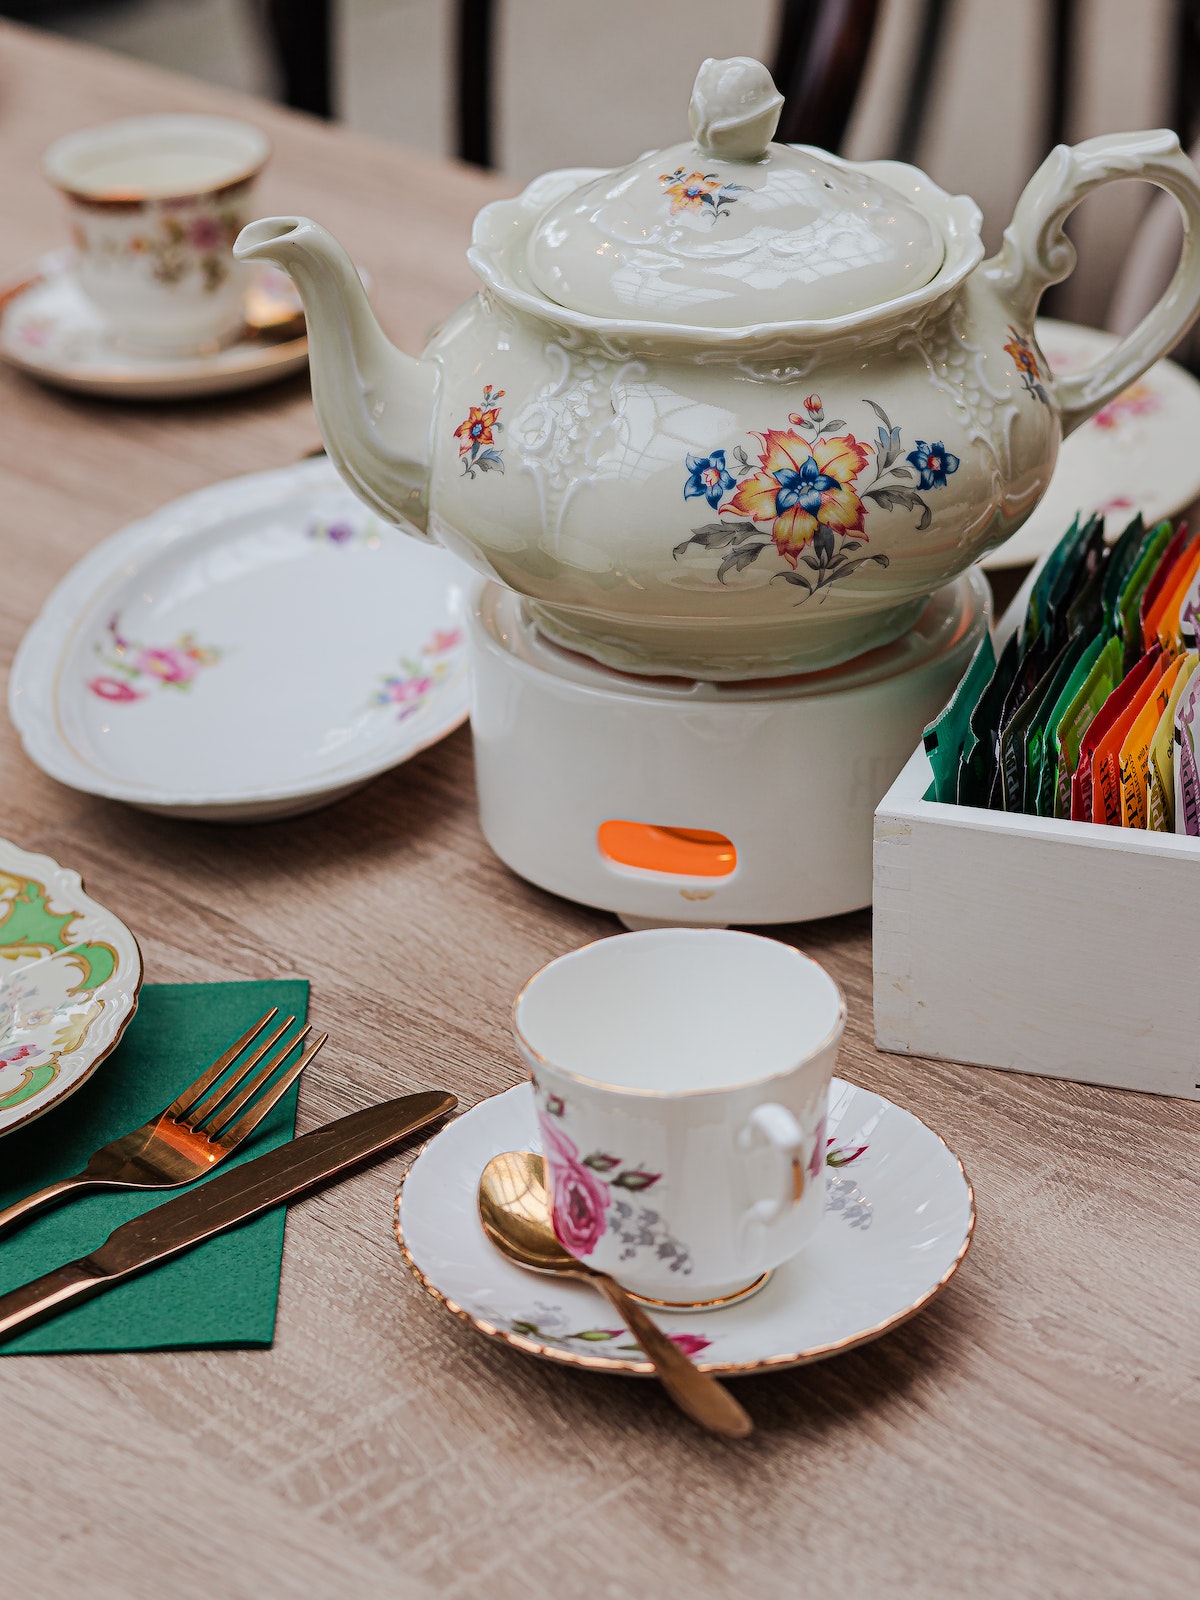 Afternoon Tea Fundraiser Ideas and Tips,  afternoon tea fundraiser ideas